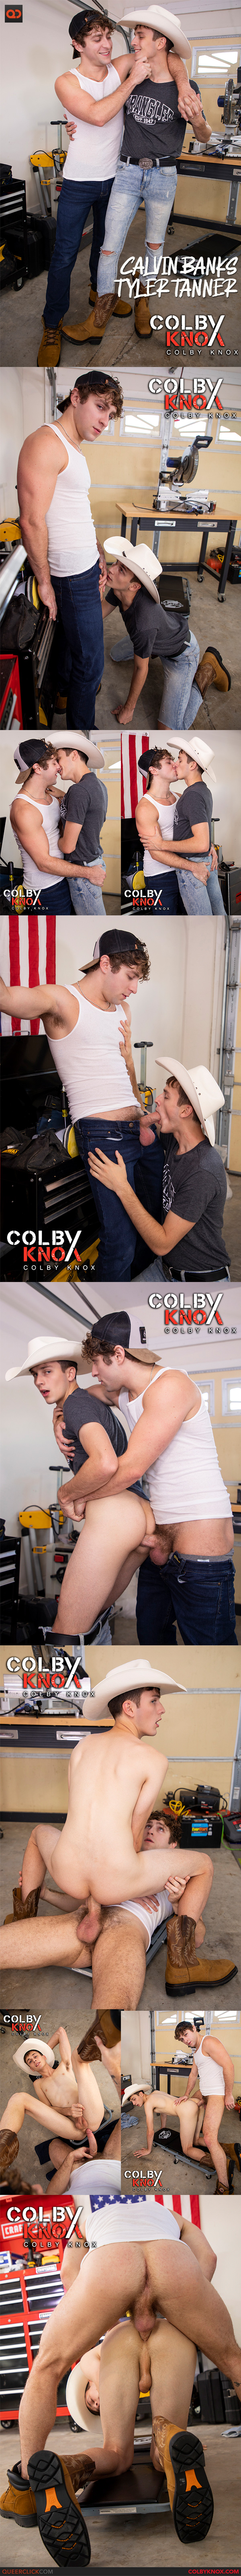 Colby Knox: Calvin Banks and Tyler Tanner